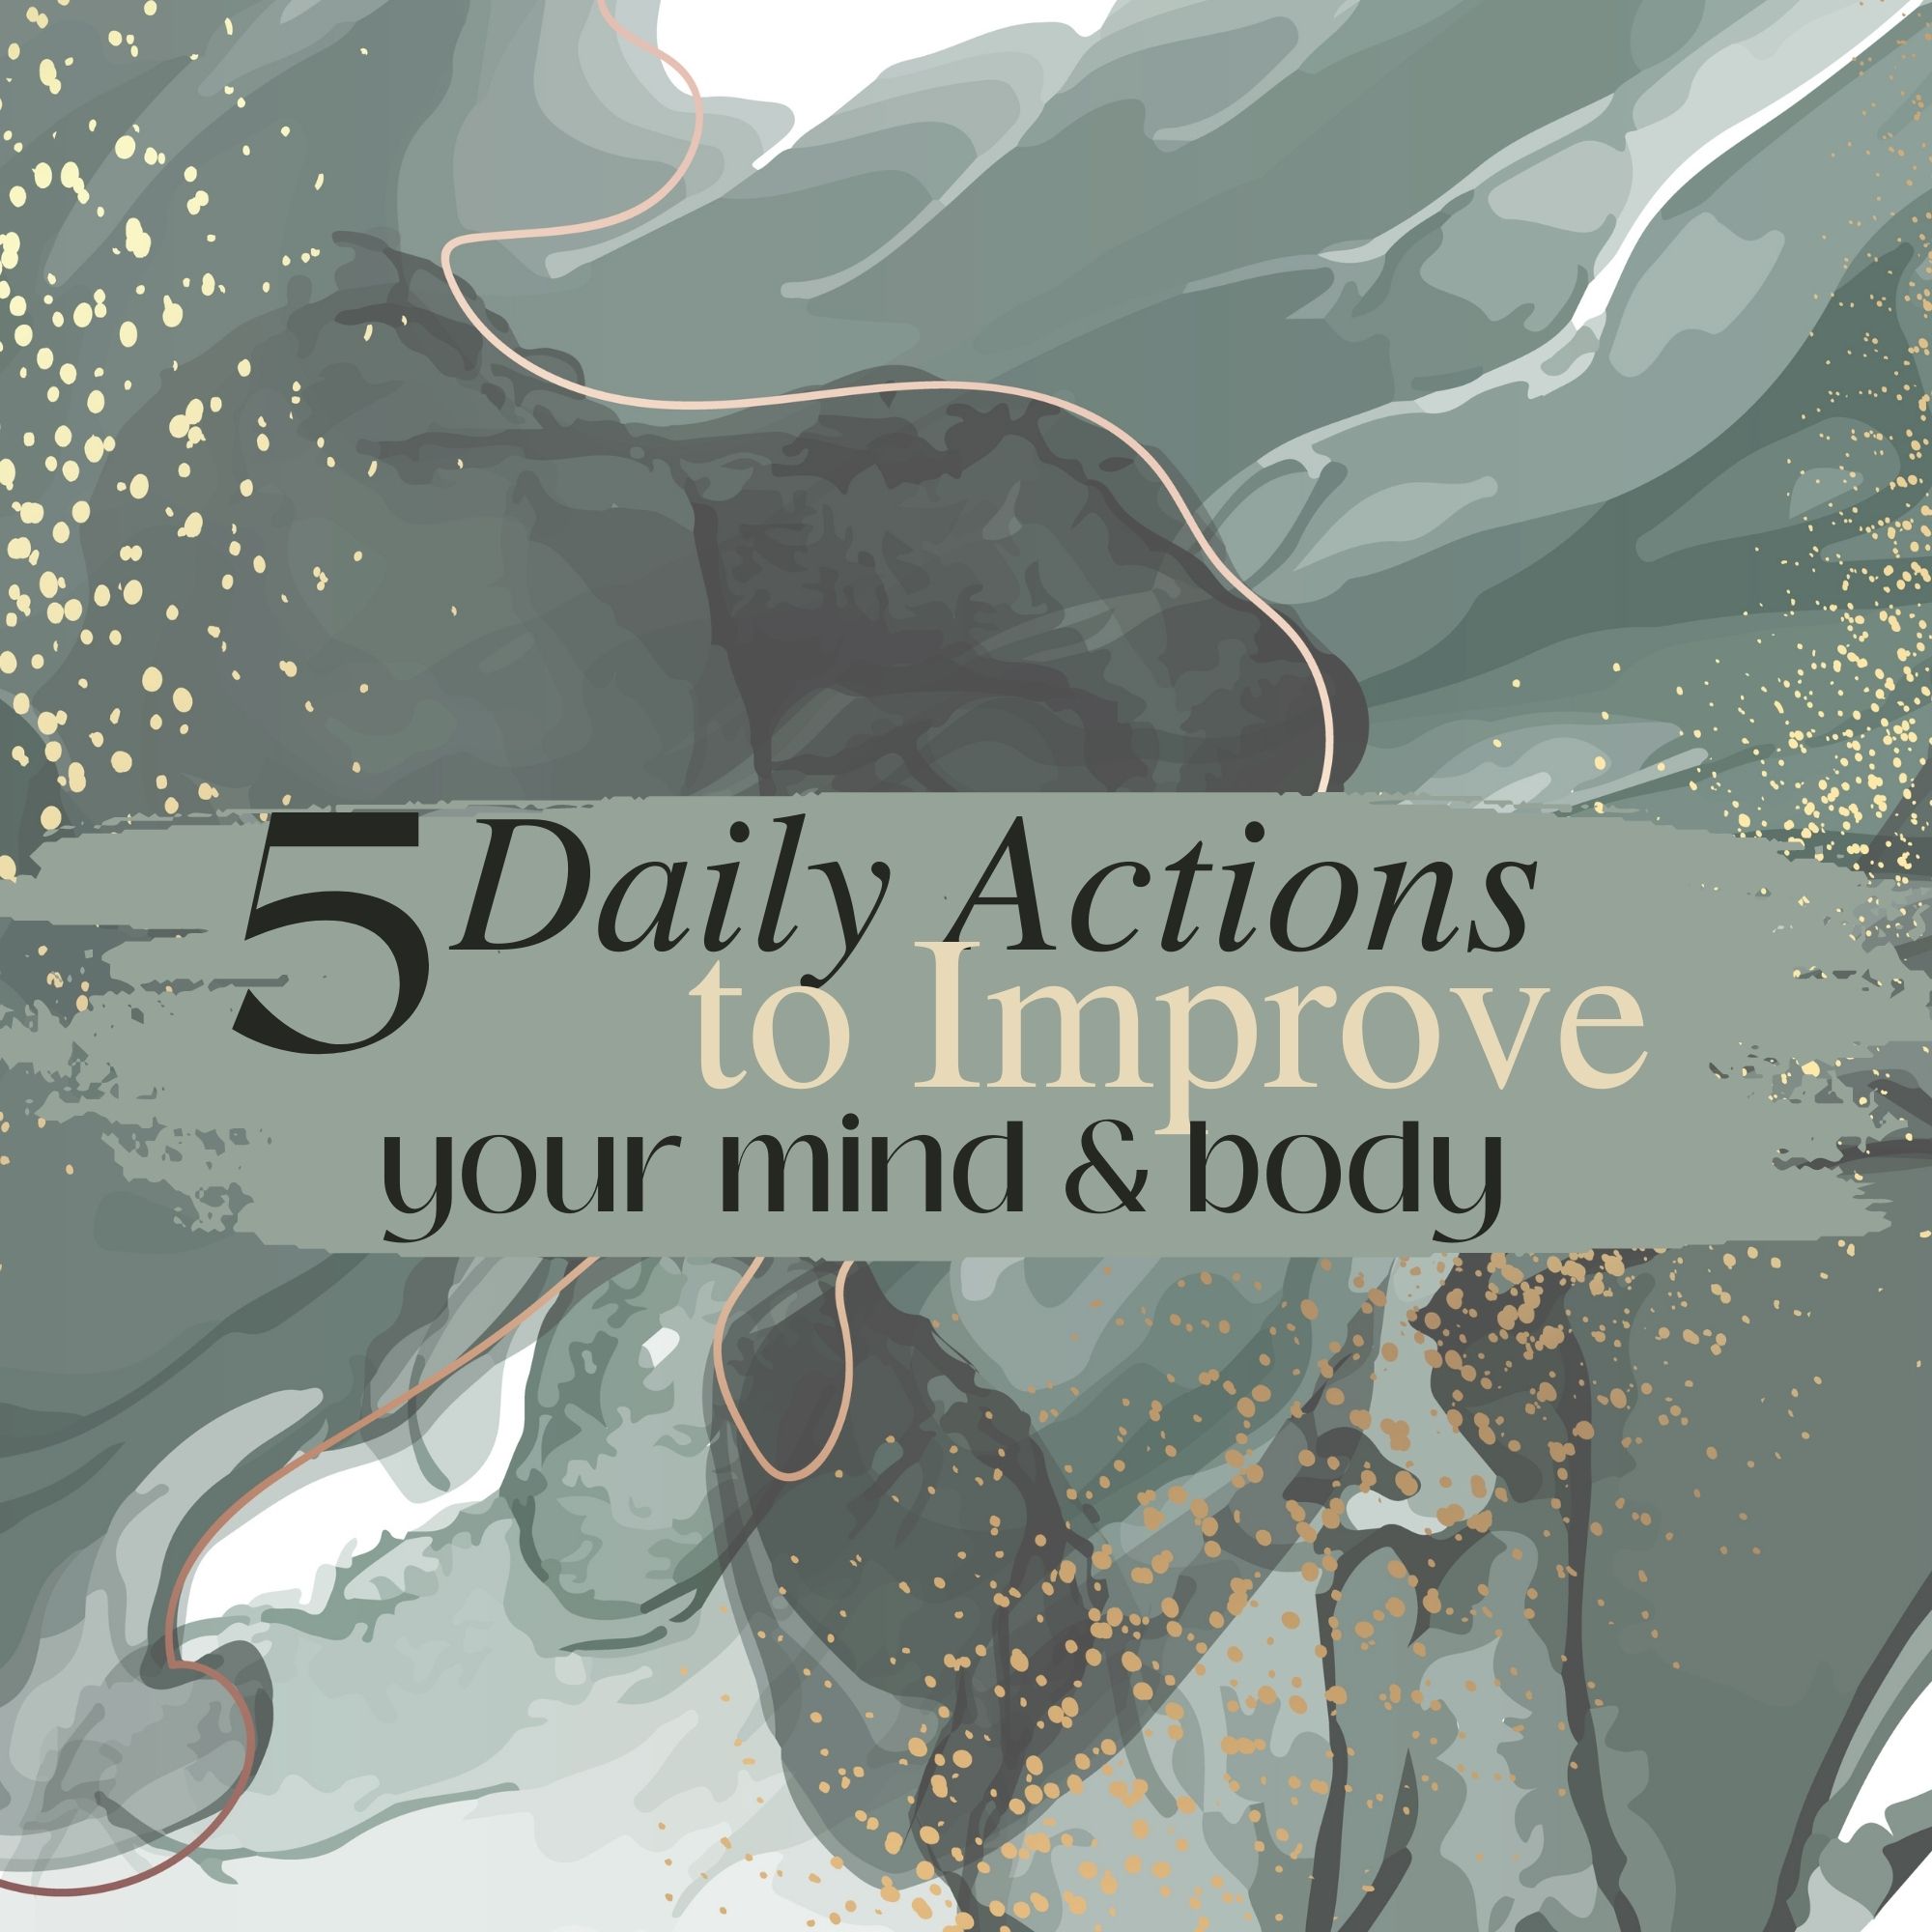 5 Daily Actions to Improve Your Mind & Body